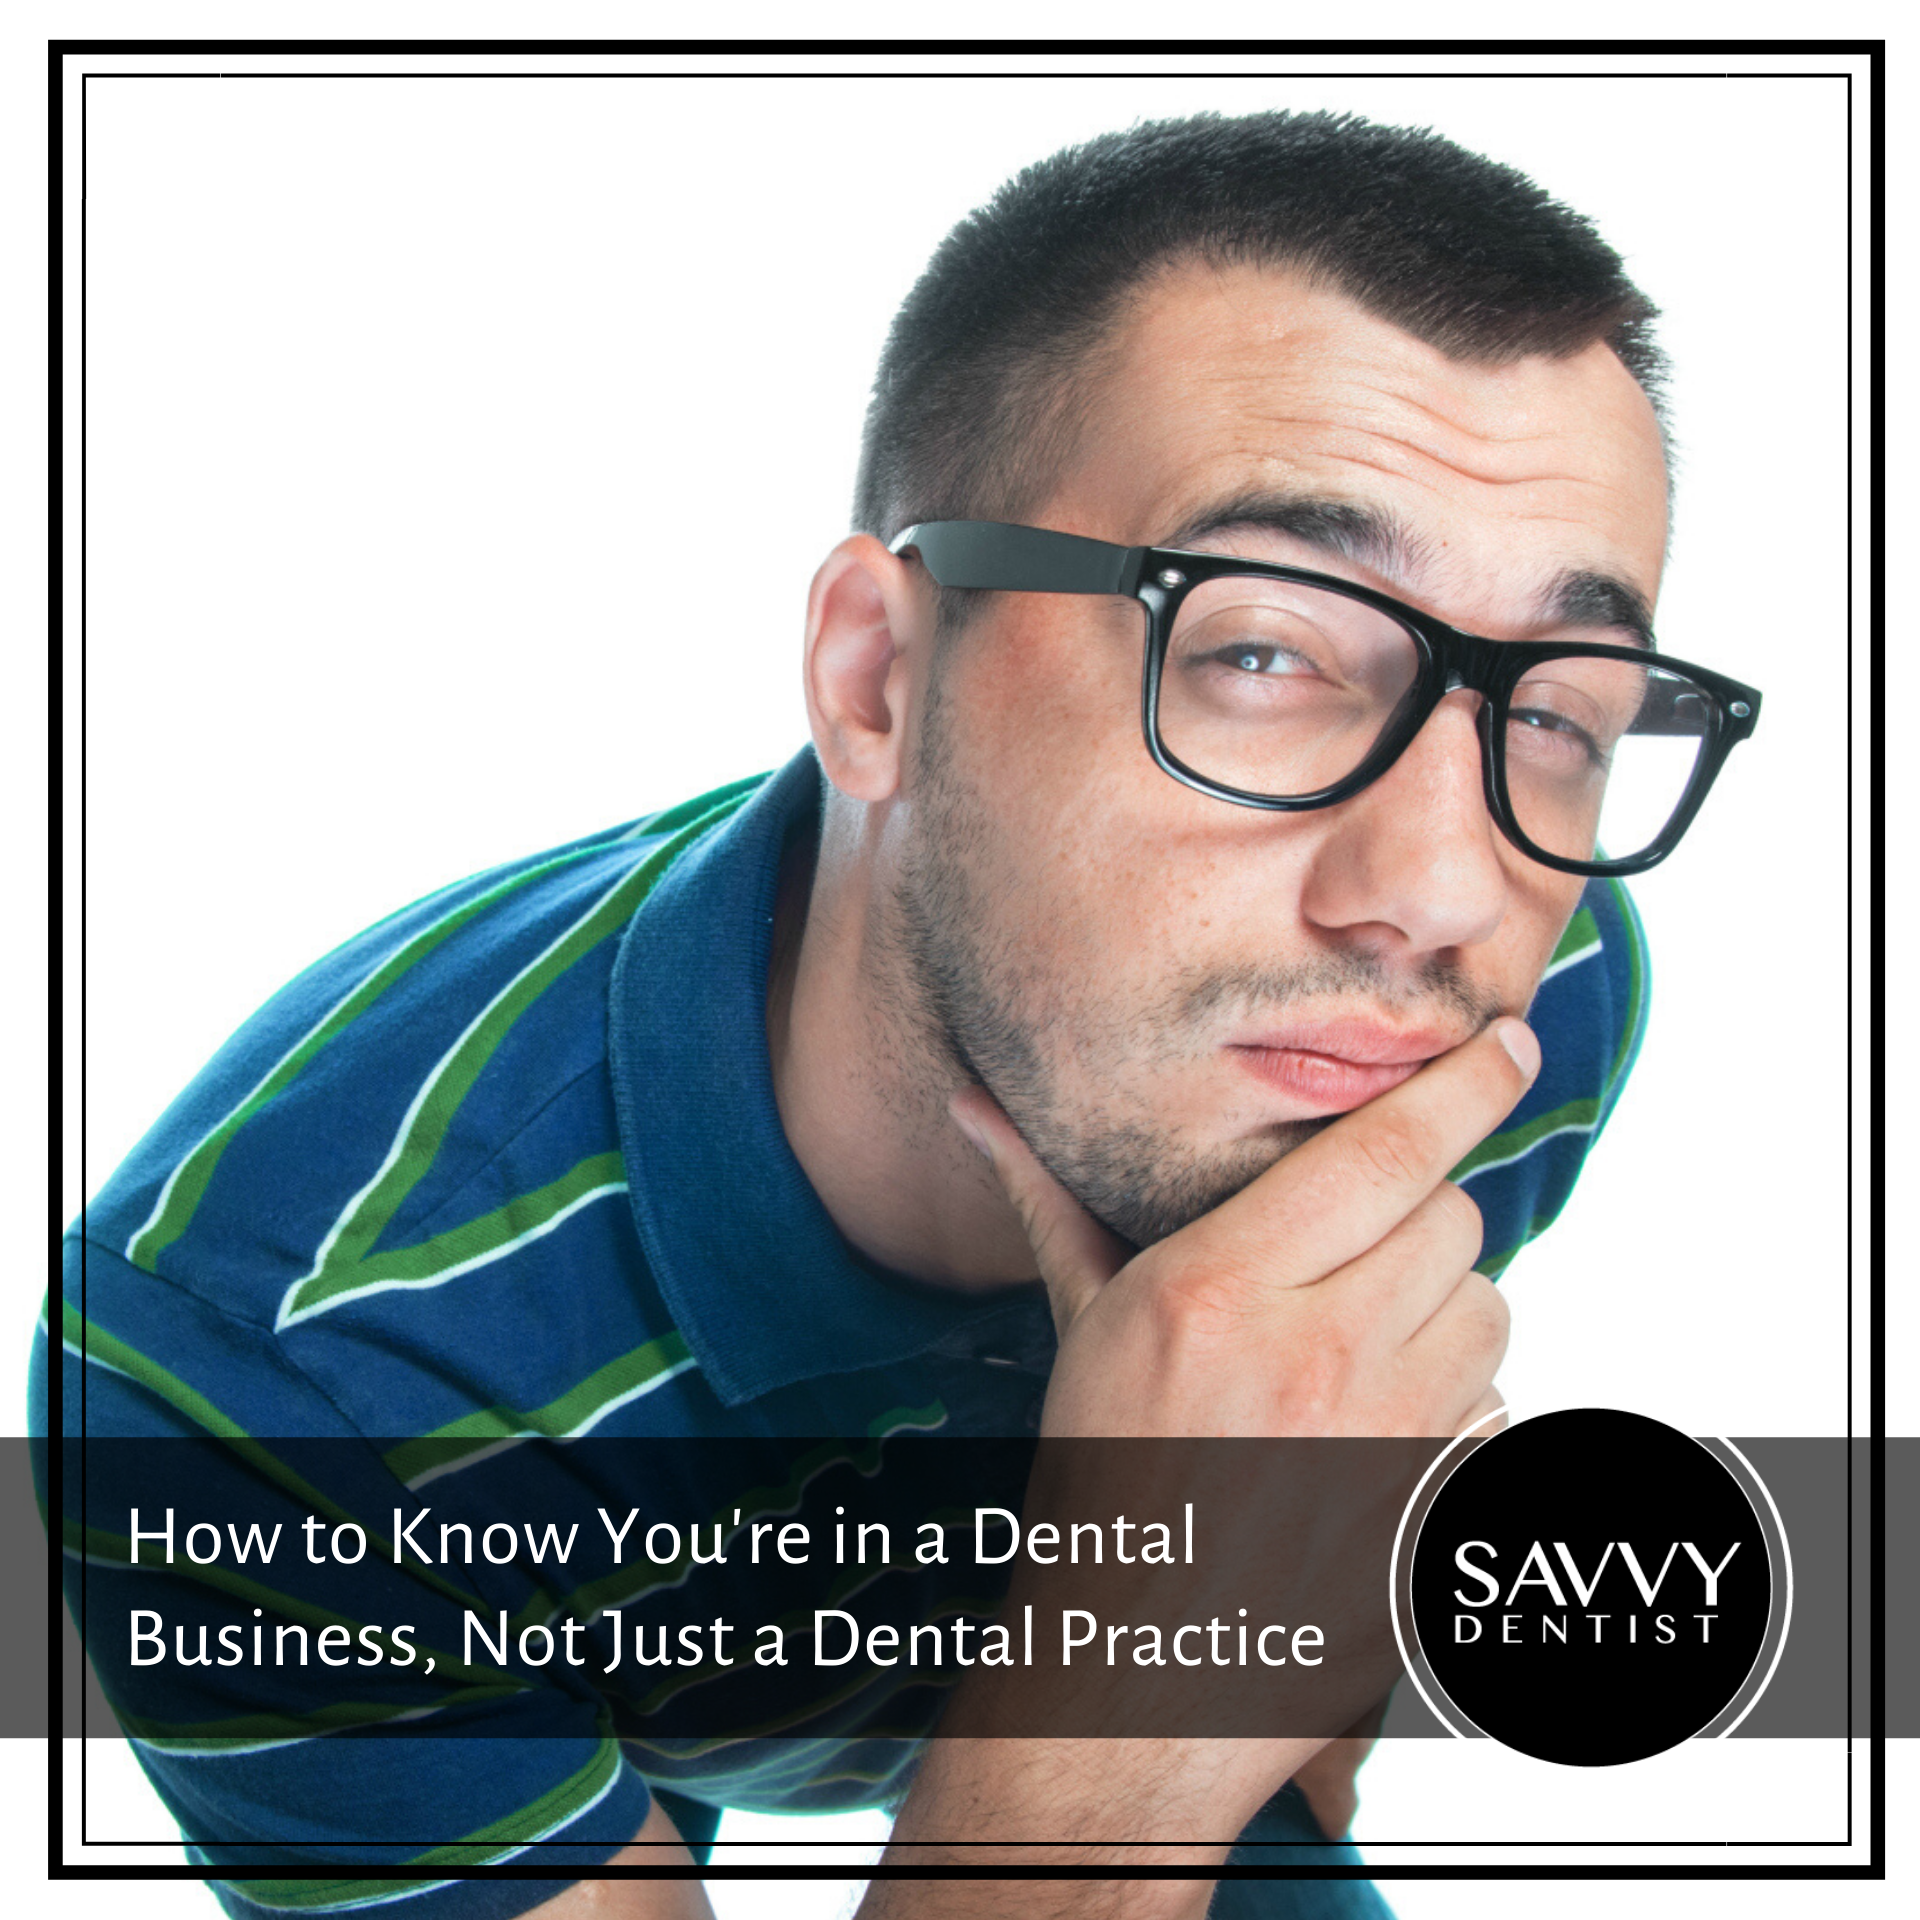 How to Know You’re in a Dental Business, Not Just a Dental Practice